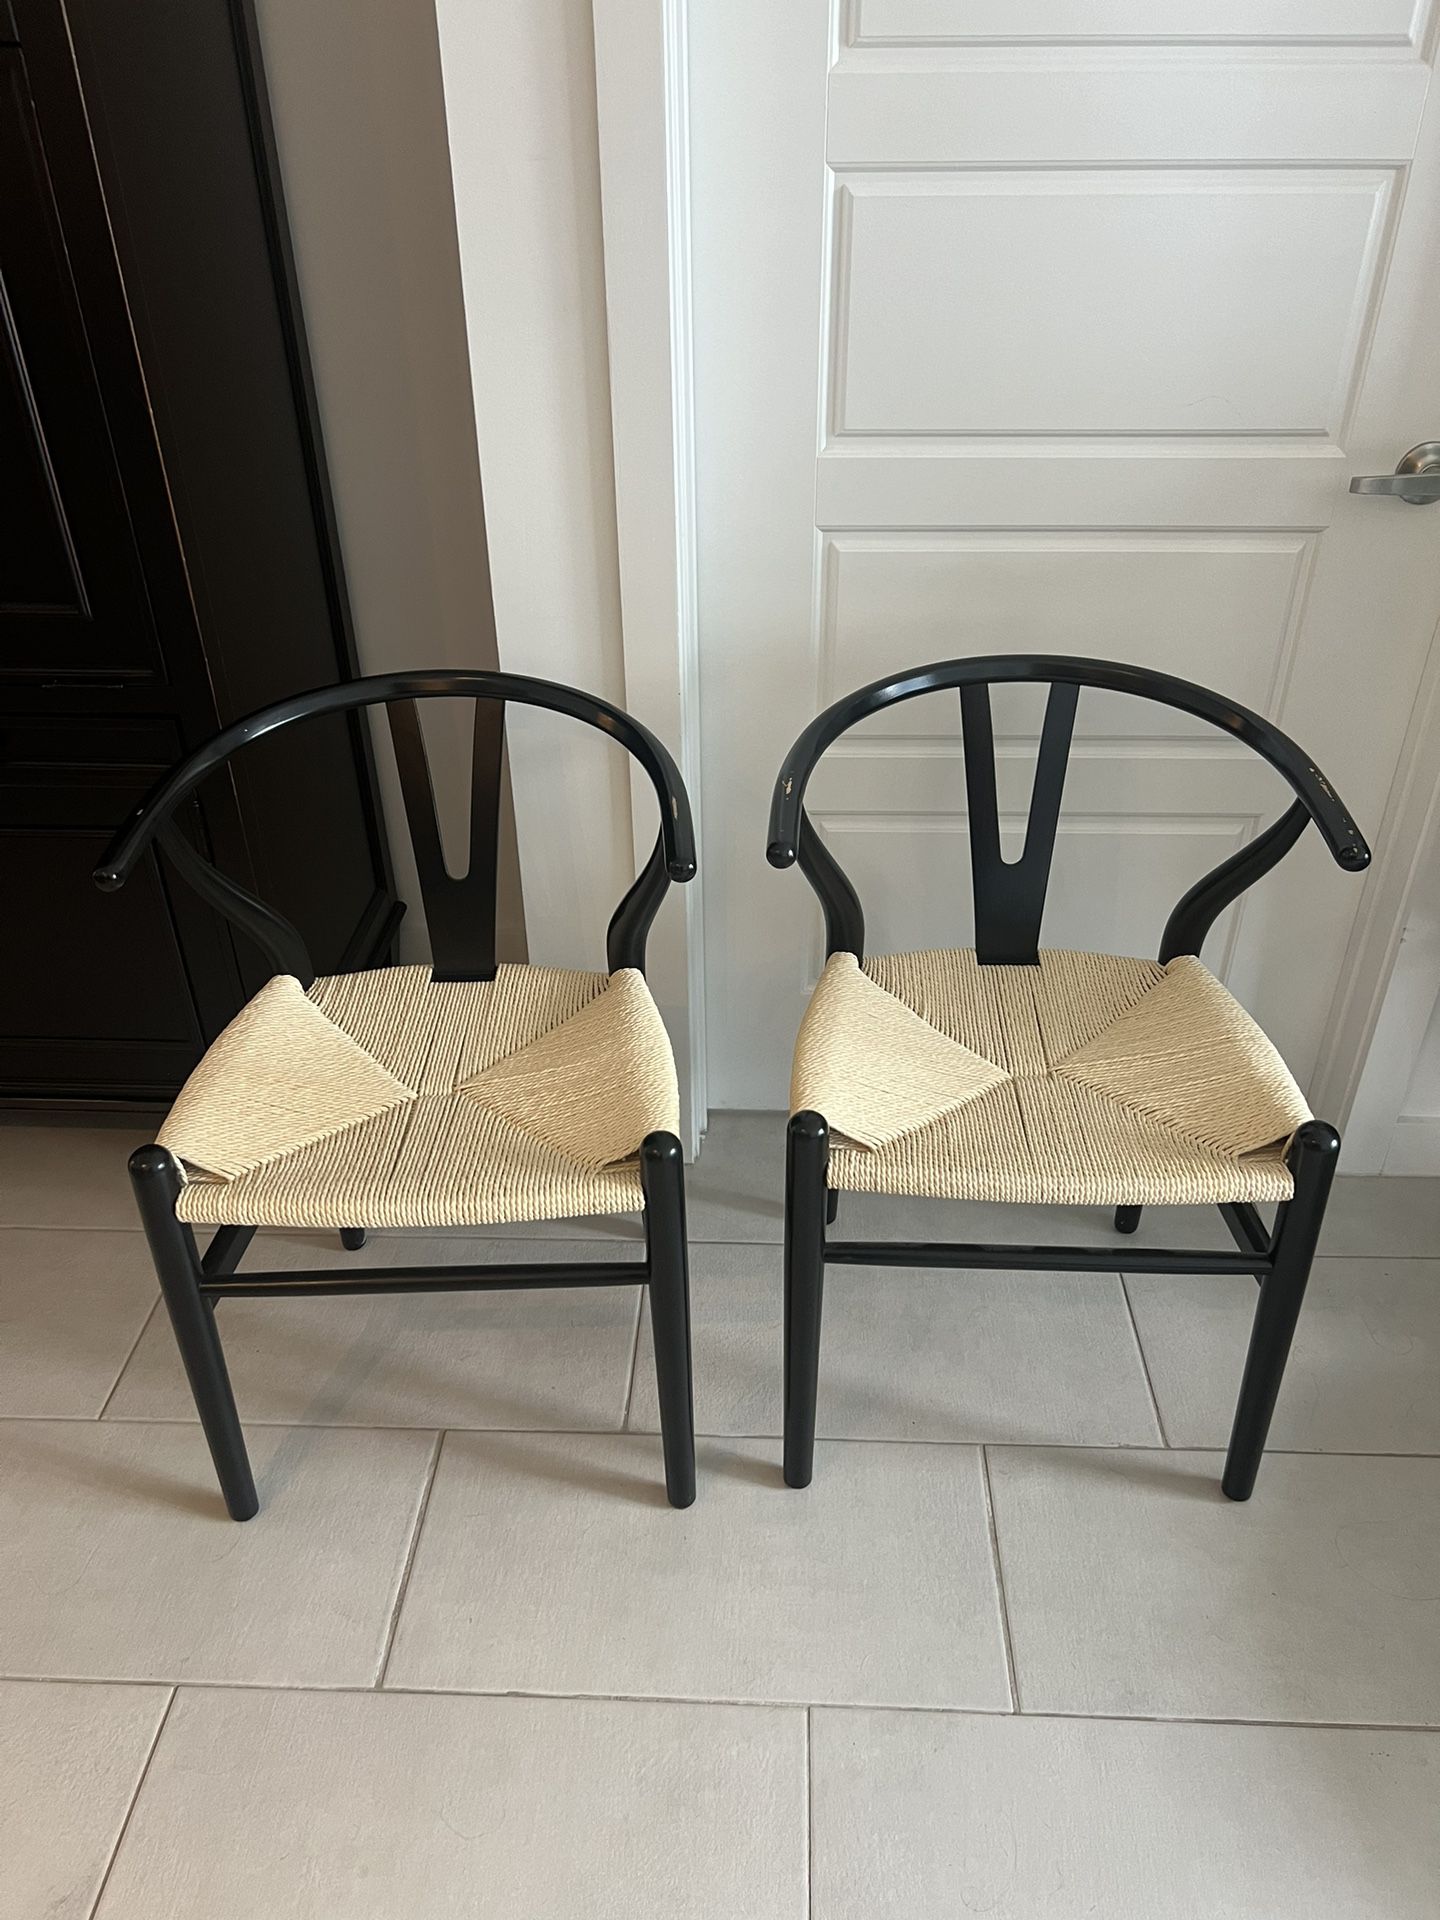 2 Scandinavian-style Black And Beige Chairs